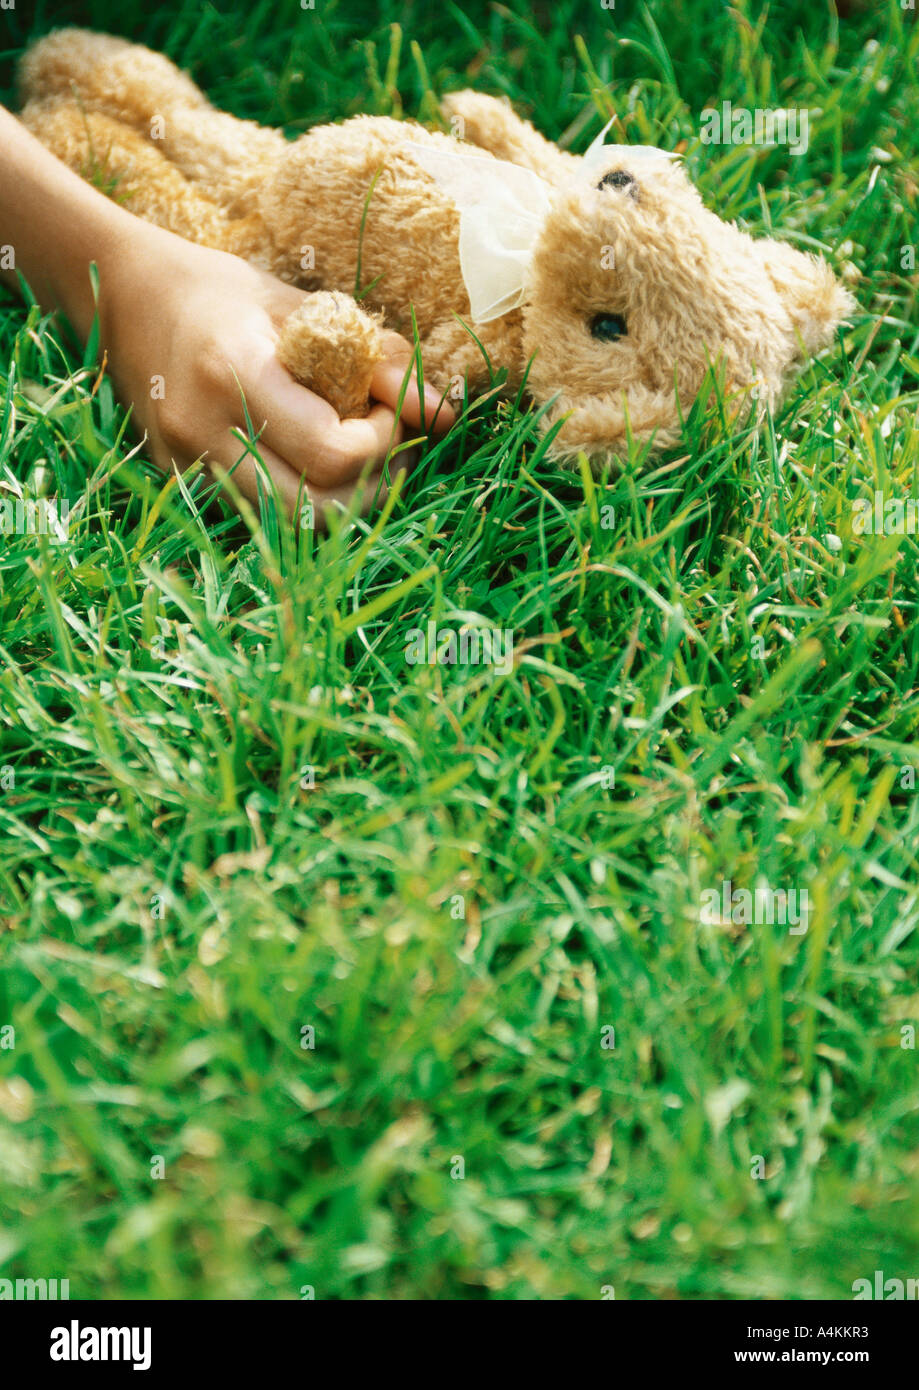 Hand holding teddy bear in grass Banque D'Images